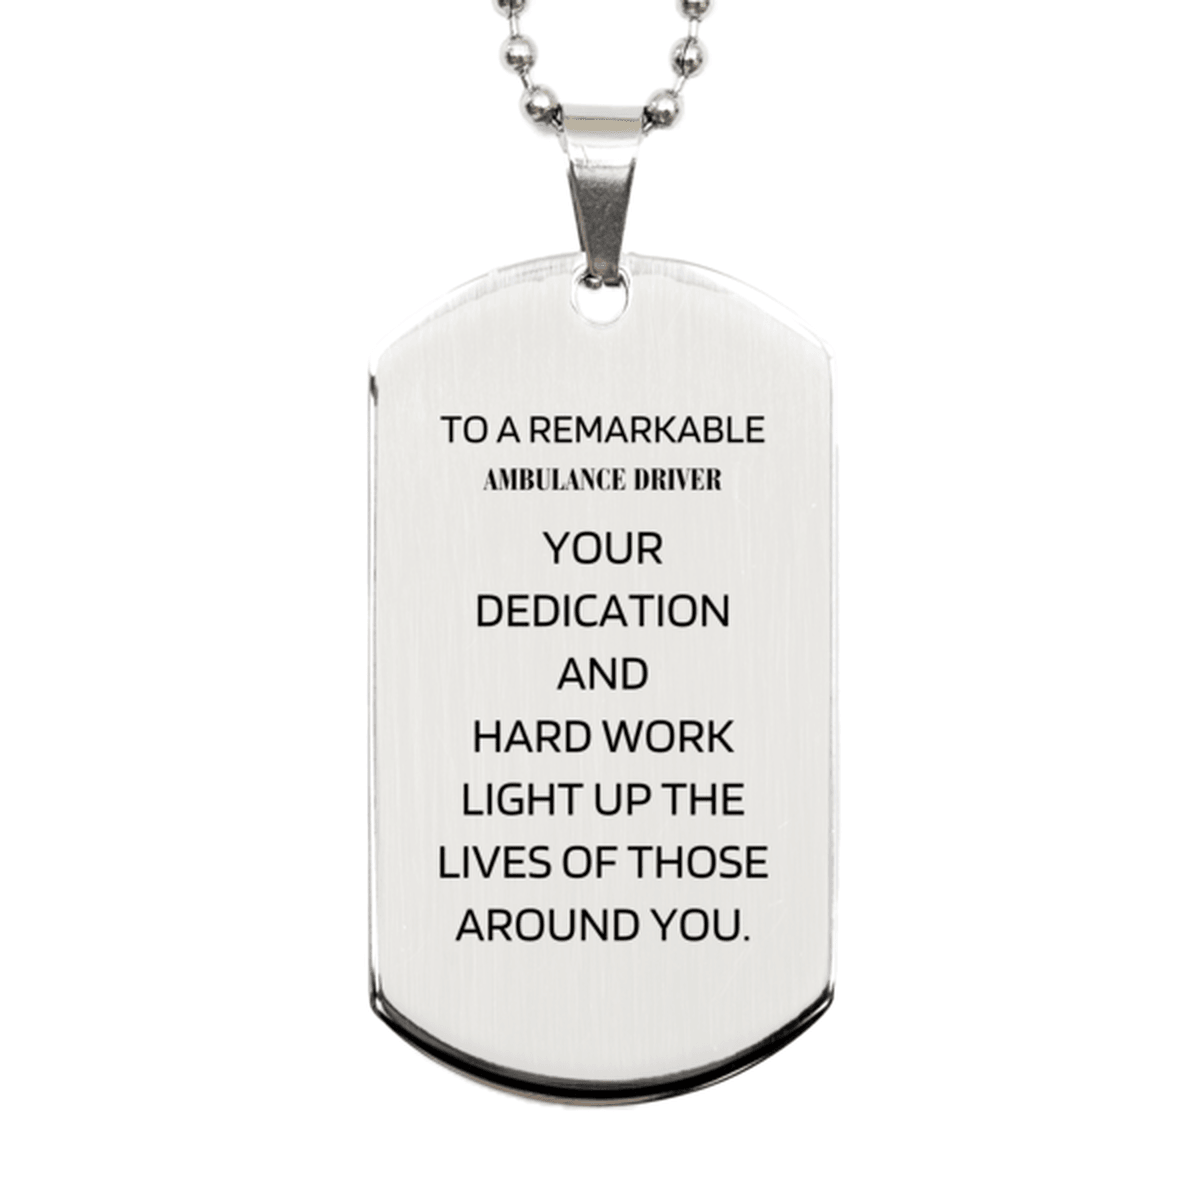 Remarkable Ambulance Driver Gifts, Your dedication and hard work, Inspirational Birthday Christmas Unique Silver Dog Tag For Ambulance Driver, Coworkers, Men, Women, Friends - Mallard Moon Gift Shop